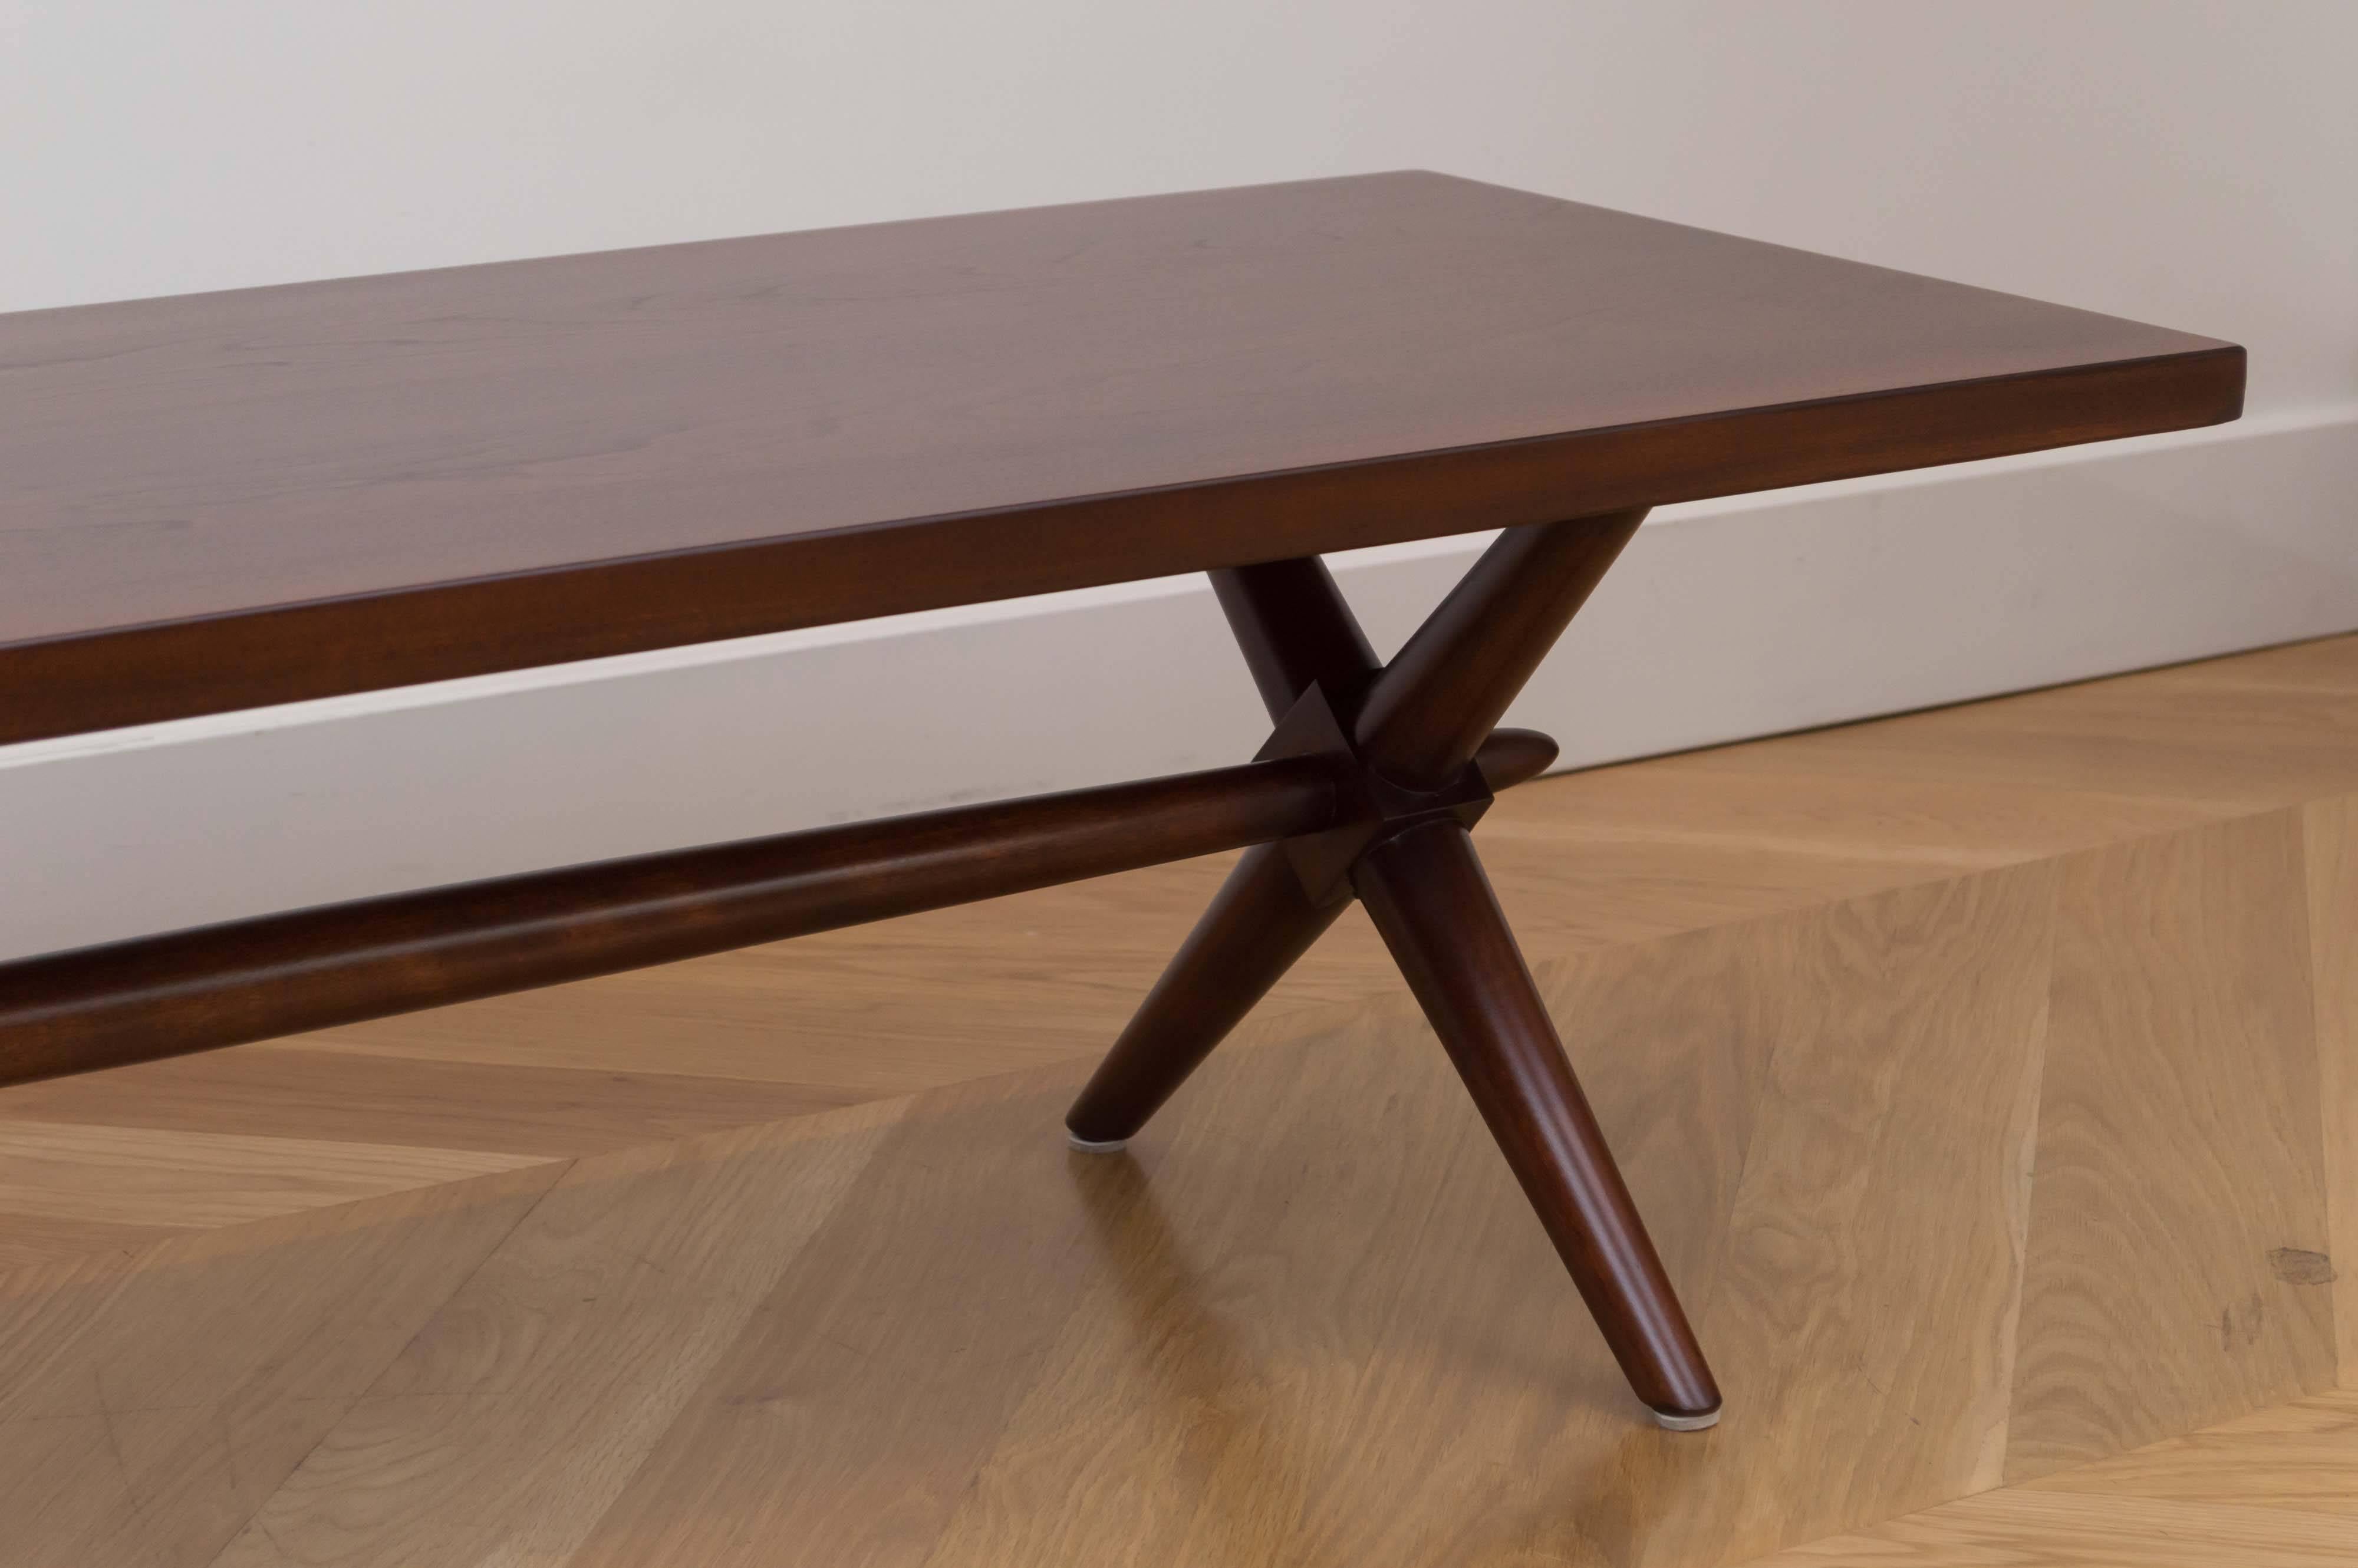 Newly refinished mahogany coffee table with X-base designed by T.H. Robsjohn-Gibbings for Widdicomb.